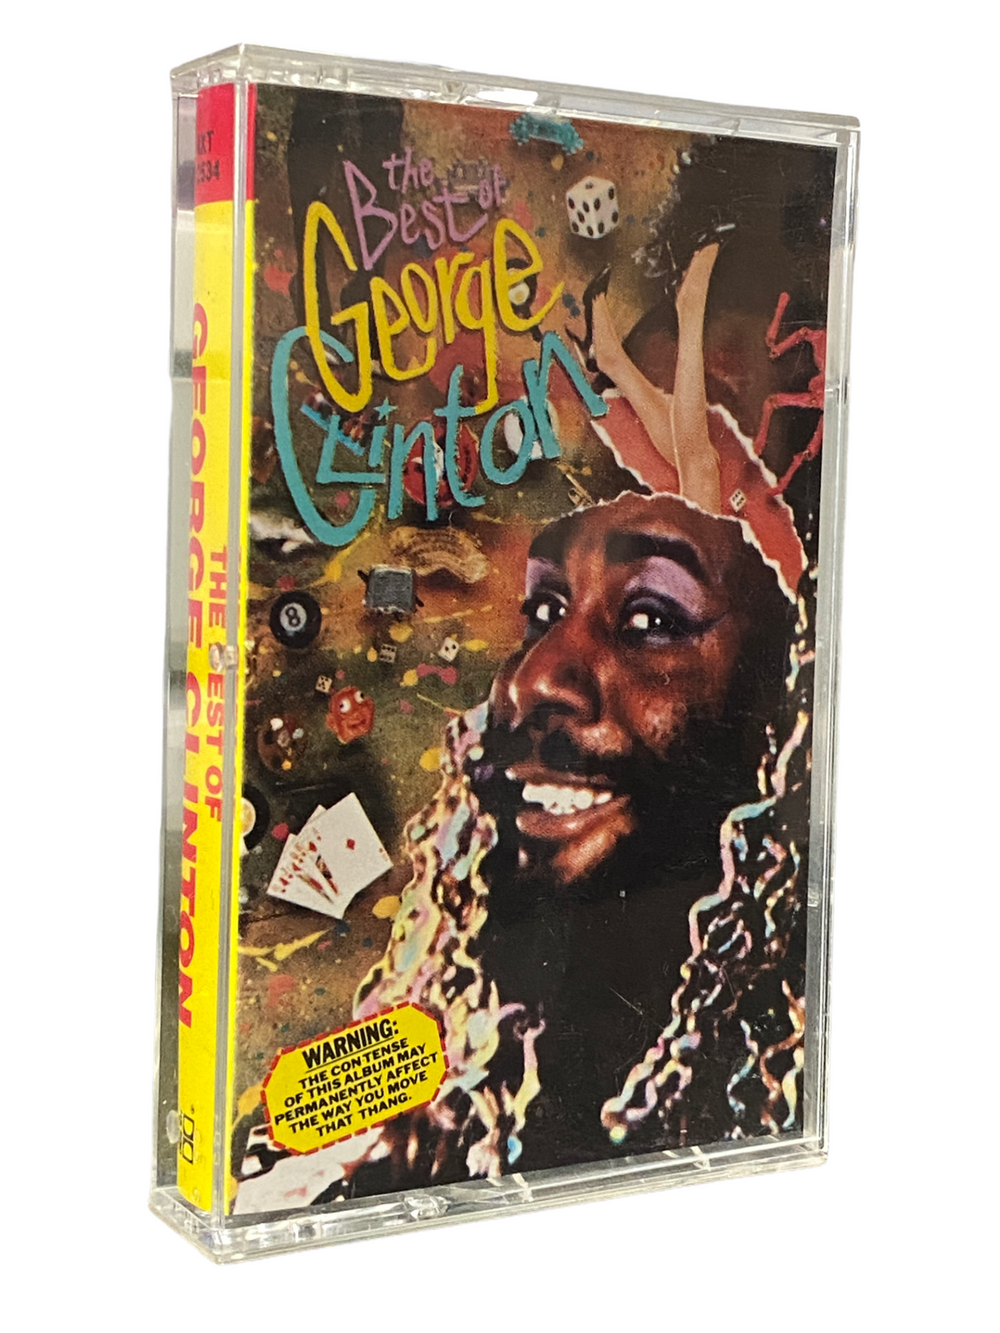 Prince – George Clinton The Best Of Original Cassette Tape USA 1986 Release Prince